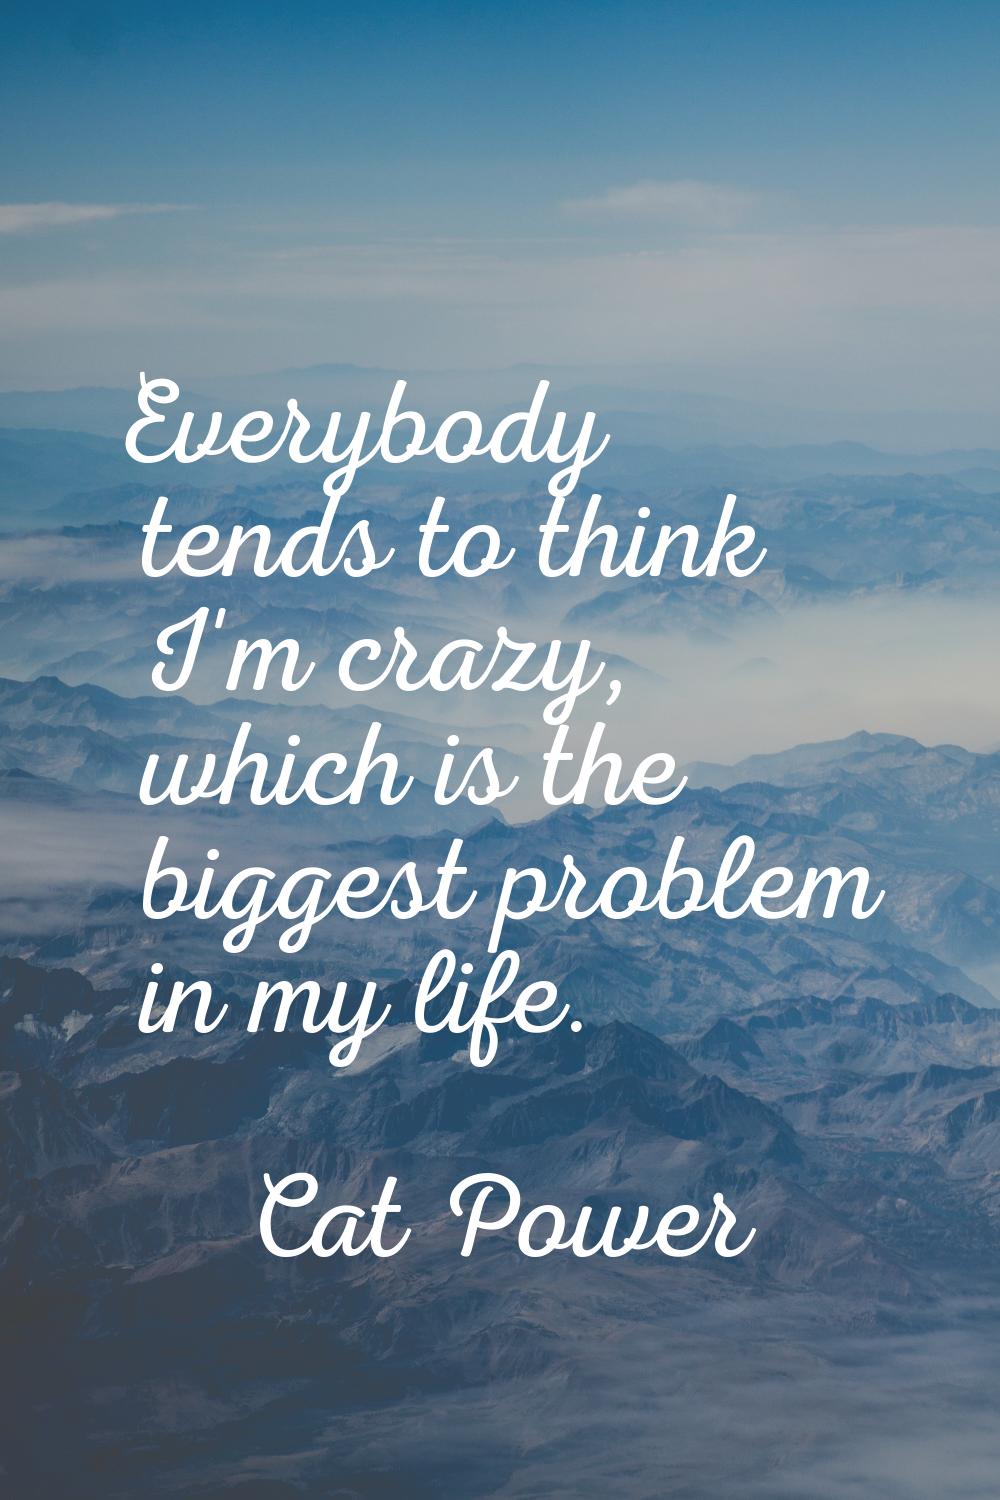 Everybody tends to think I'm crazy, which is the biggest problem in my life.